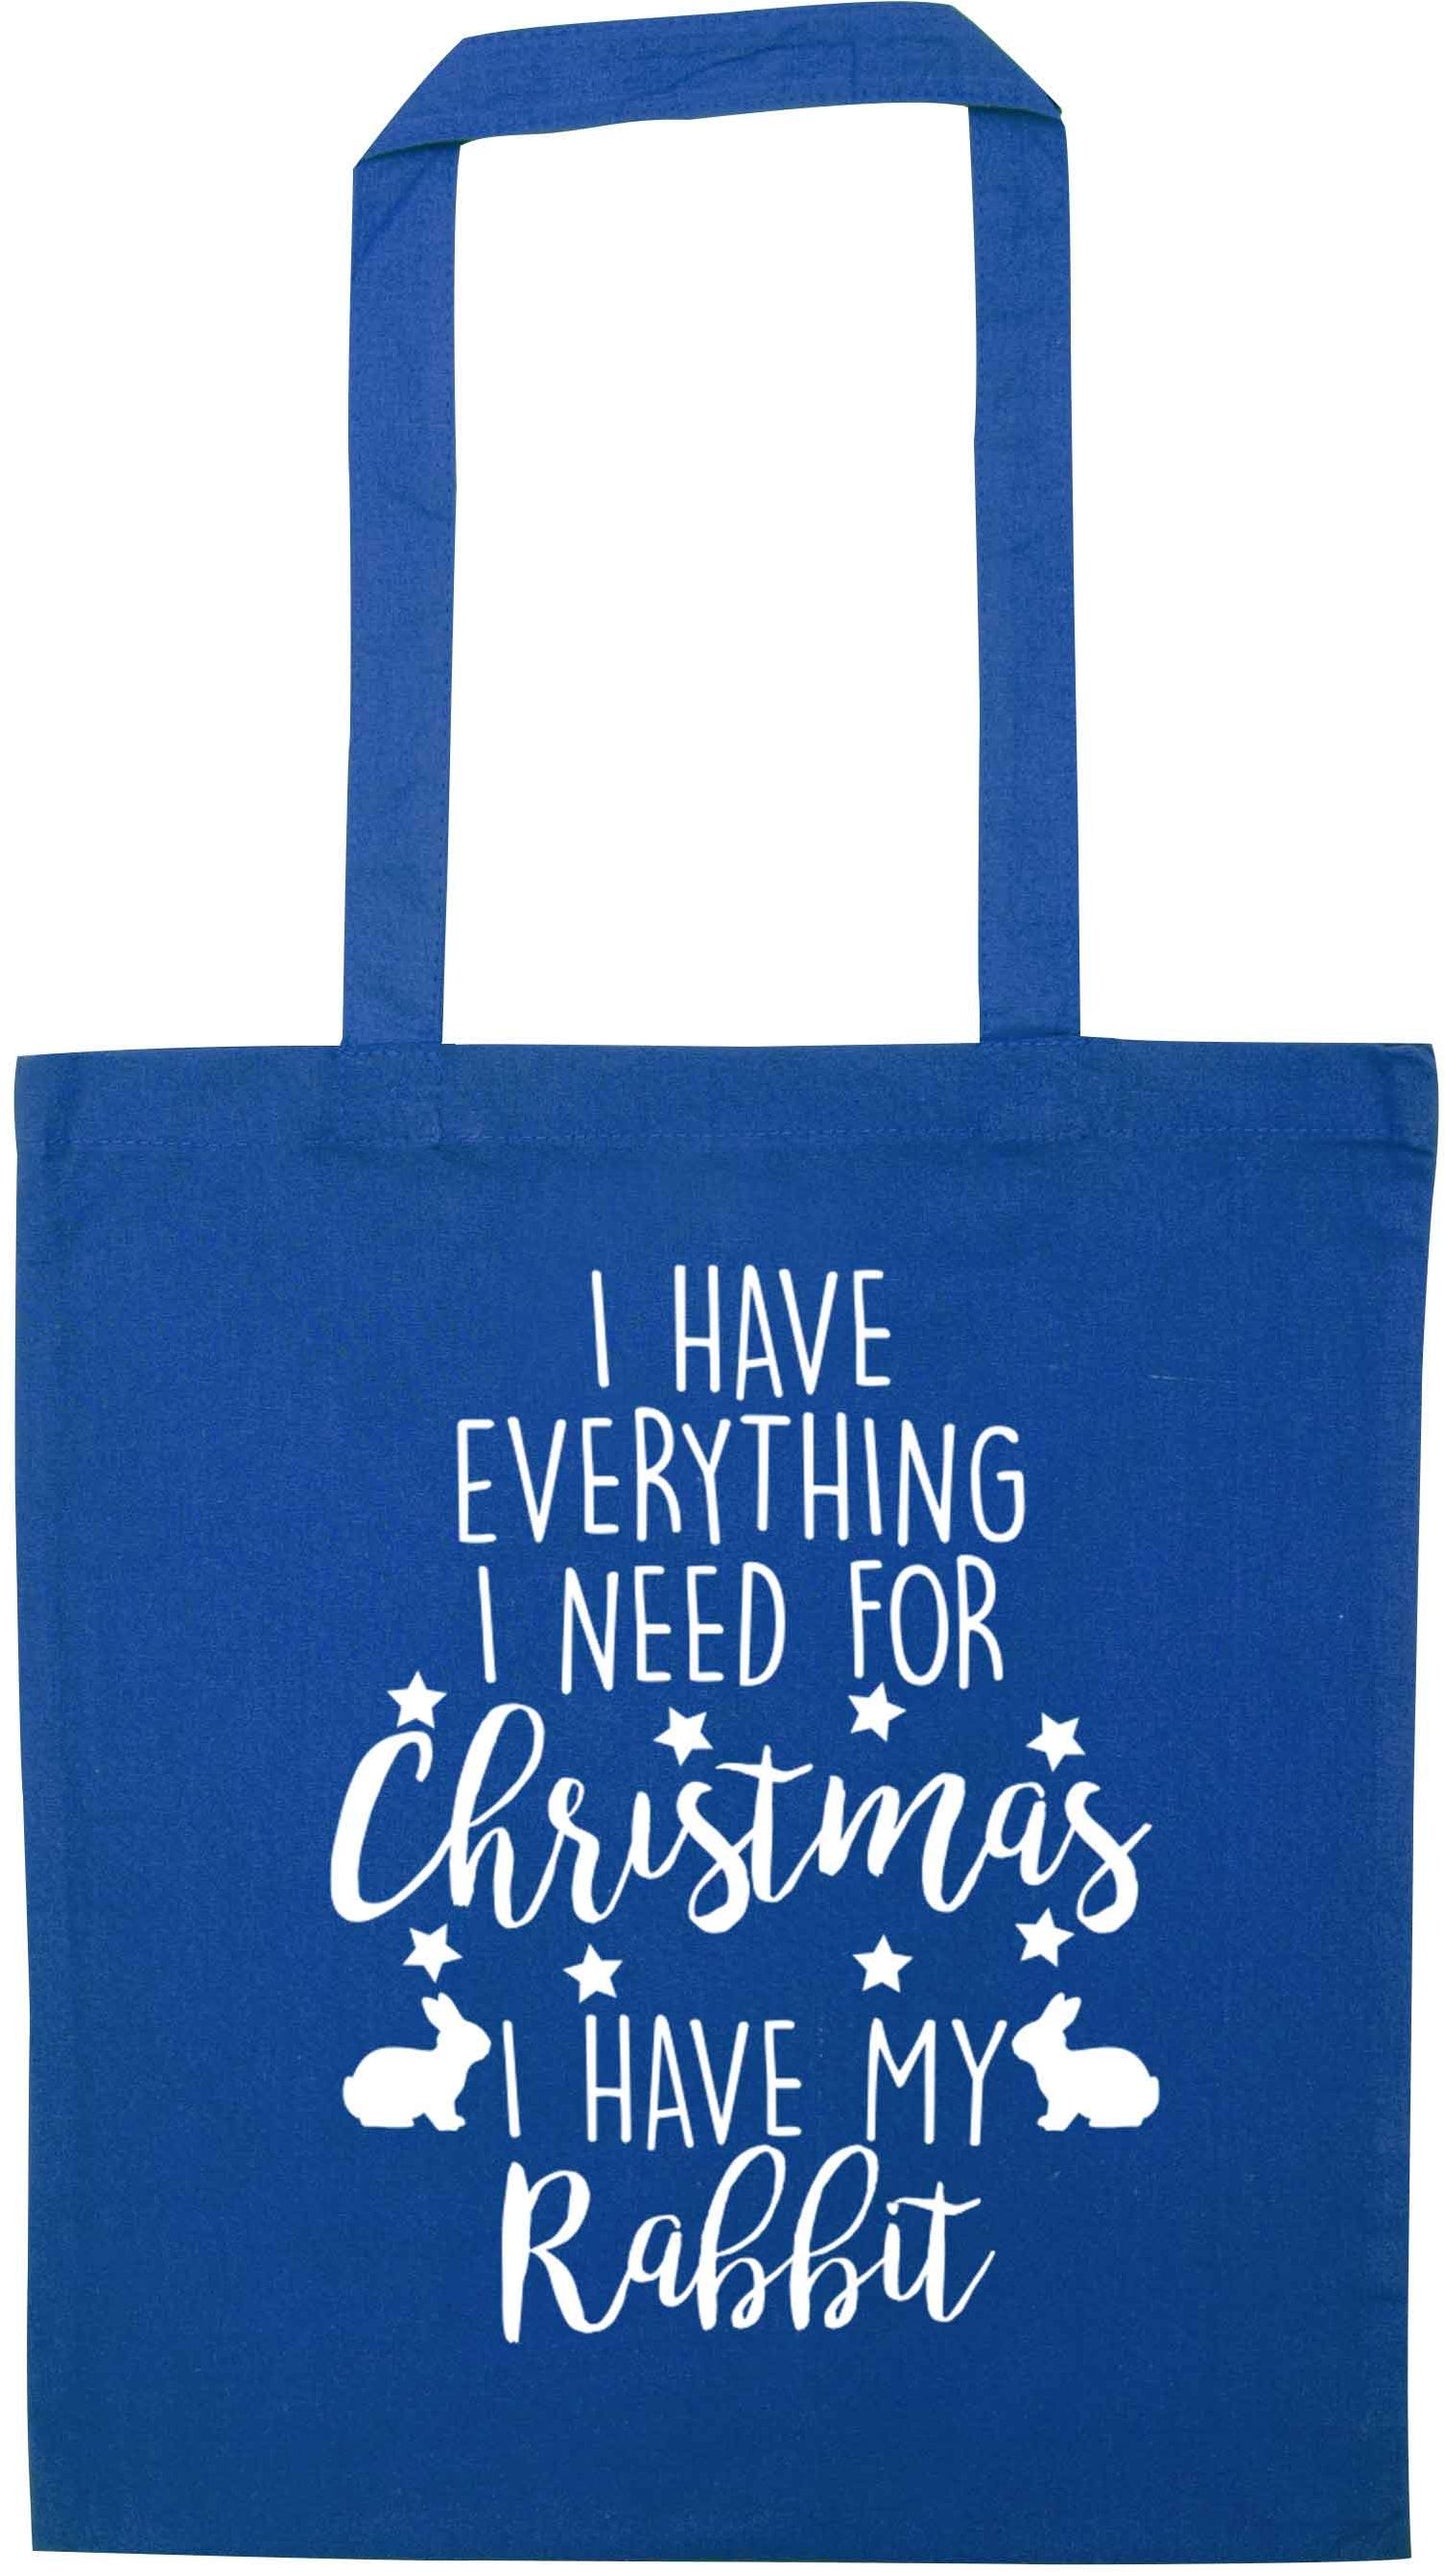 I have everything I need for Christmas I have my rabbit blue tote bag